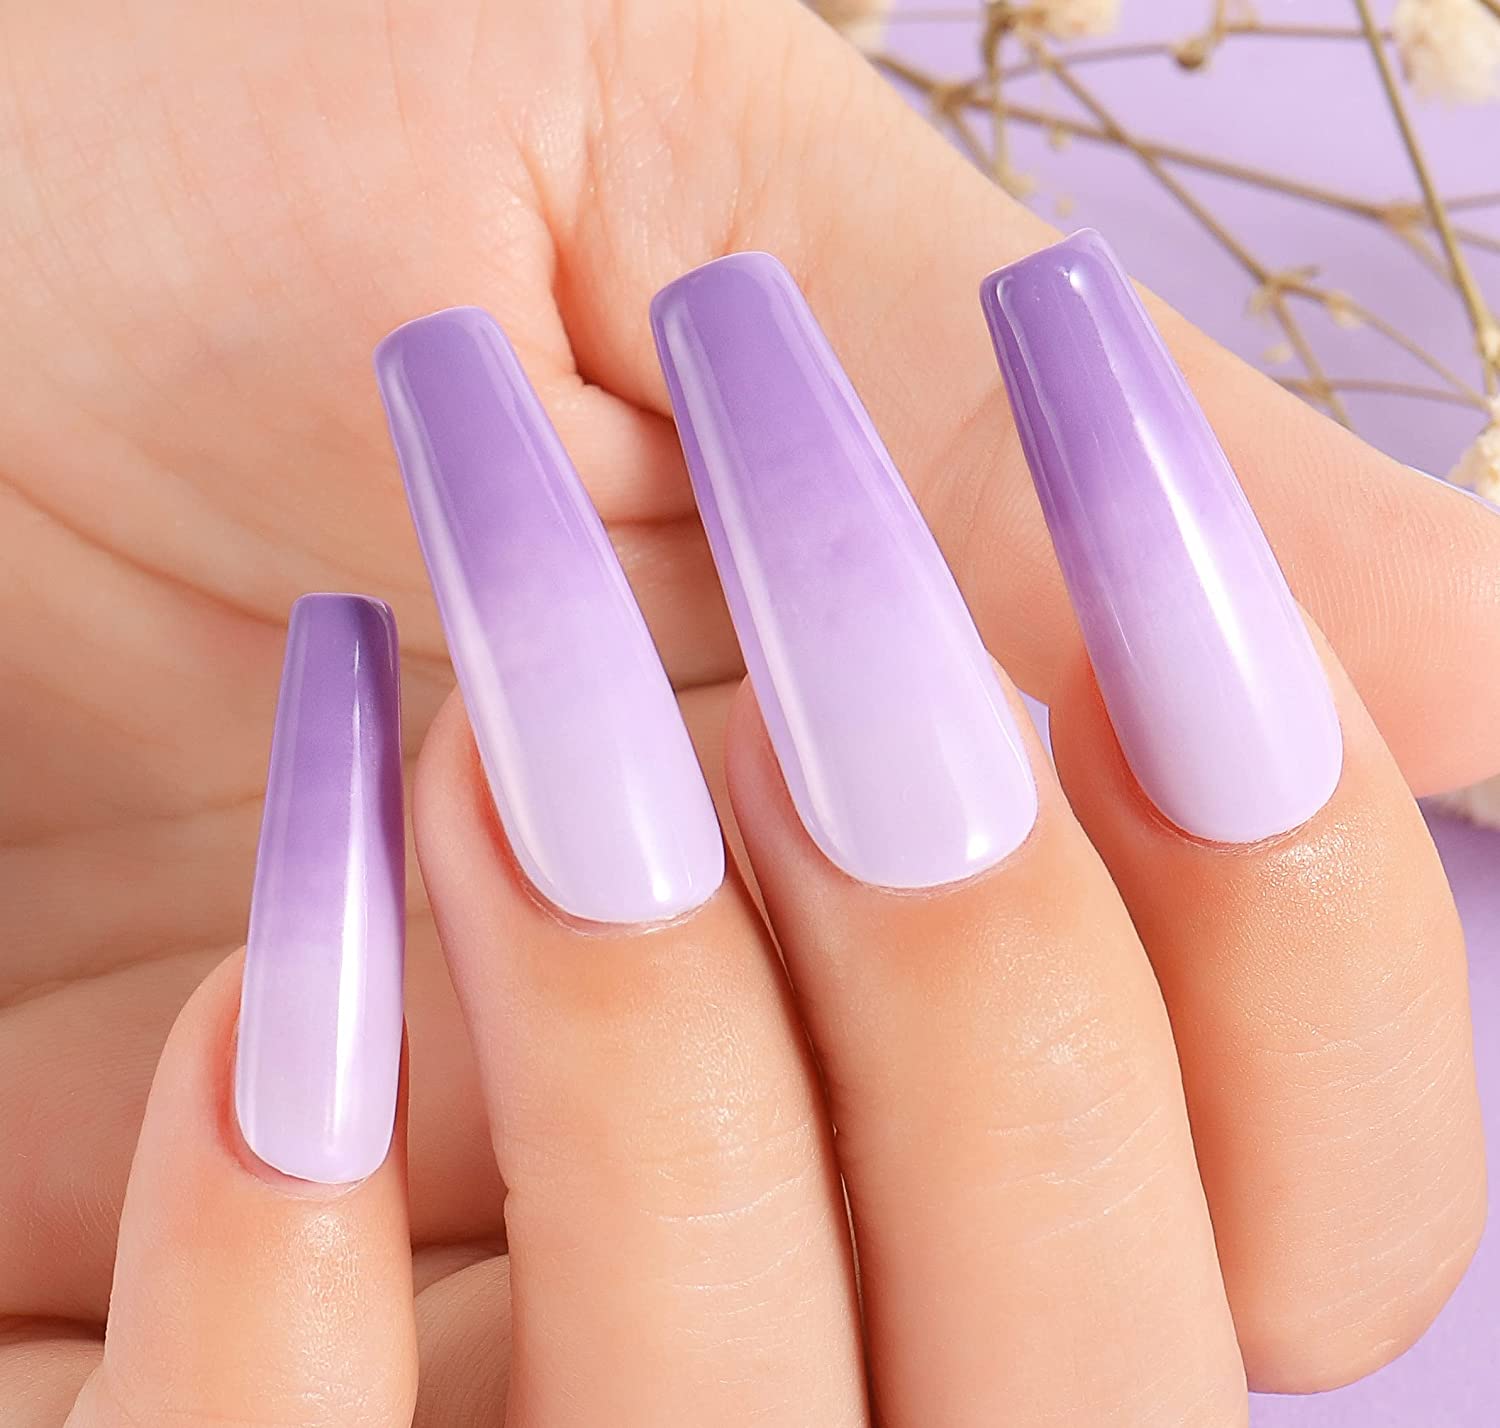 Eye Candy Nails & Training - Acrylic nails with lilac gel polish by Nicola  Senior on 29 March 2014 at 11:14